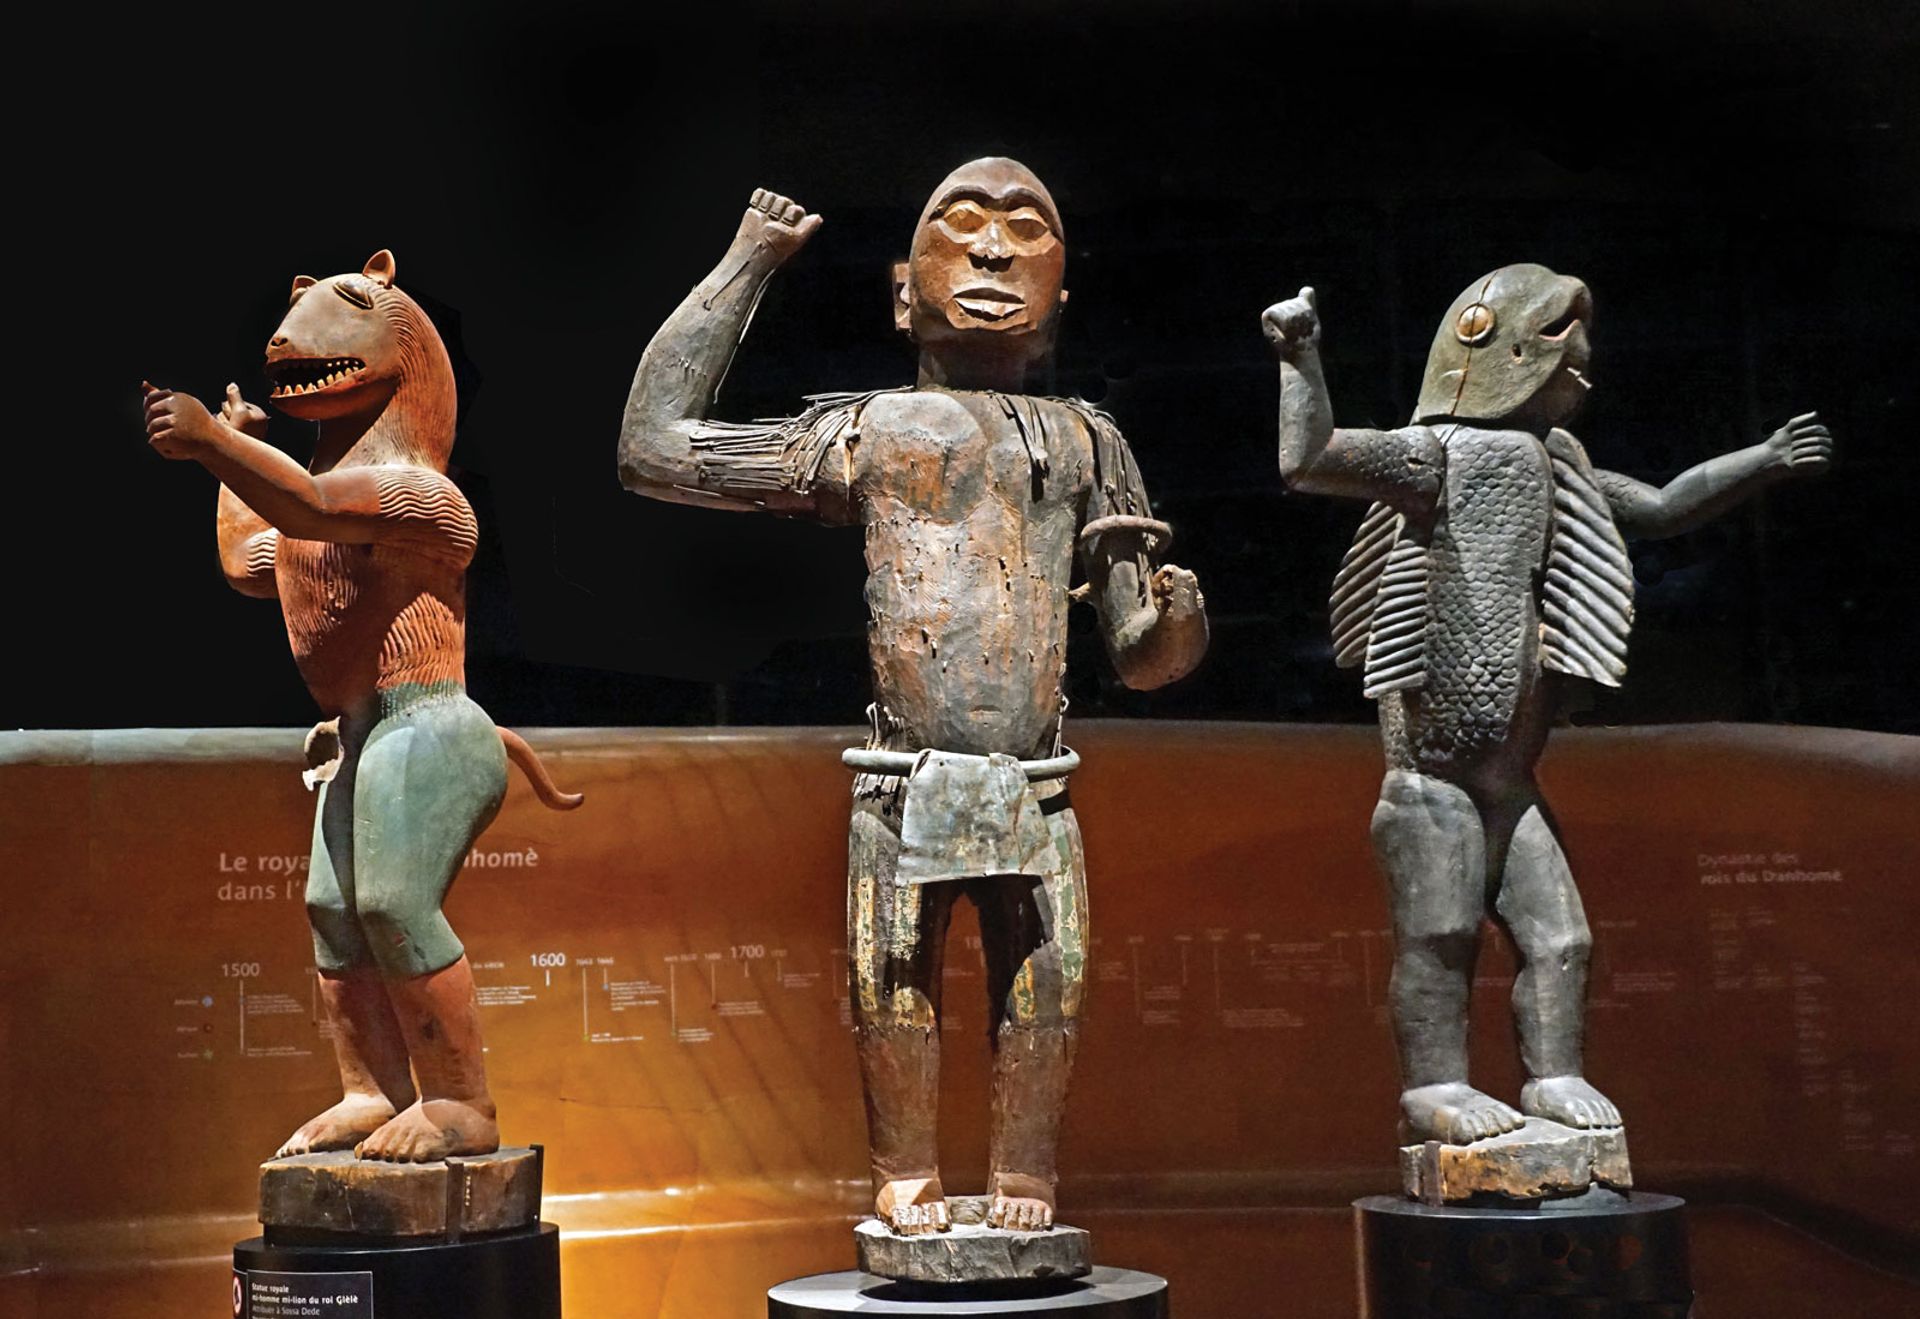 Following the publication of the Sarr-Savoy report, French president Emmanuel Macron said he would return 26 works to Benin. They have not yet been returned. © Jean-Pierre Dalbéra/Musée du Quai Branly